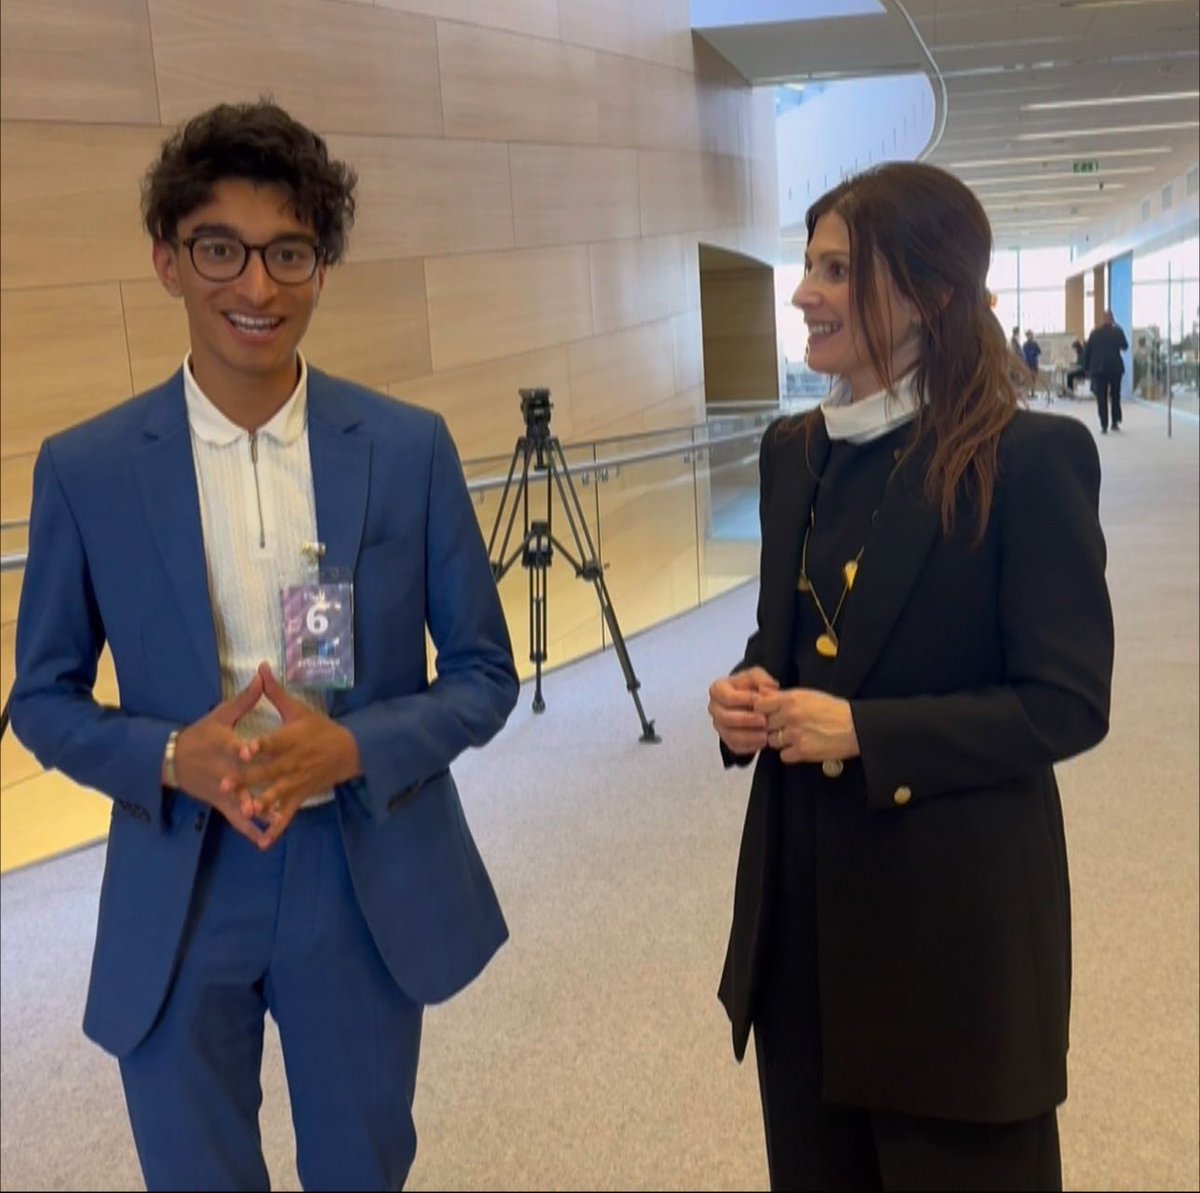 I just interviewed Irene Fellin (NATO’s Secretary General’s Special Representative for women, peace and security). We spoke about the role of NATO, why she decided to join NATO & the importance of her role. Interview will be out on TikTok & Instagram soon. #entrepreneur #nato